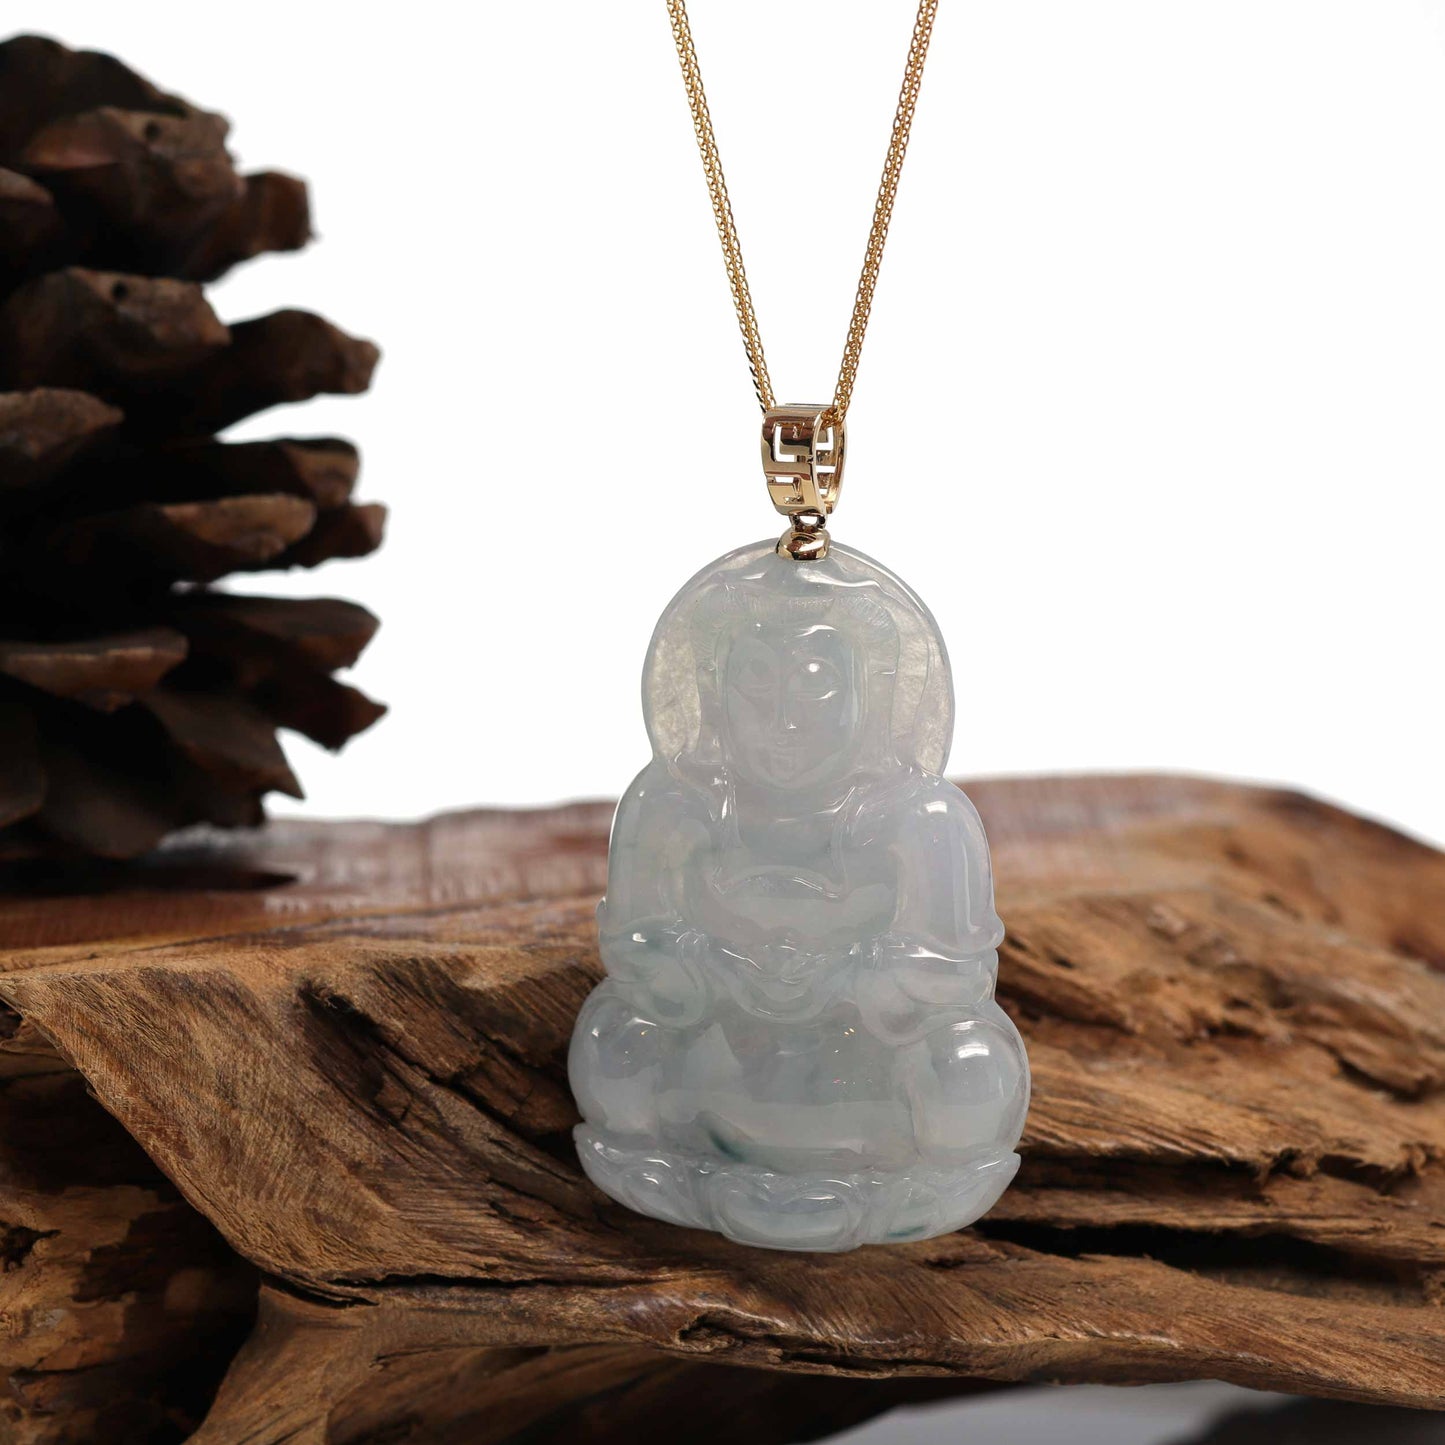 RealJade¨ 14k Yellow Gold "Goddess of Compassion" Genuine Burmese Jadeite Jade Guanyin Necklace With Good Luck Design